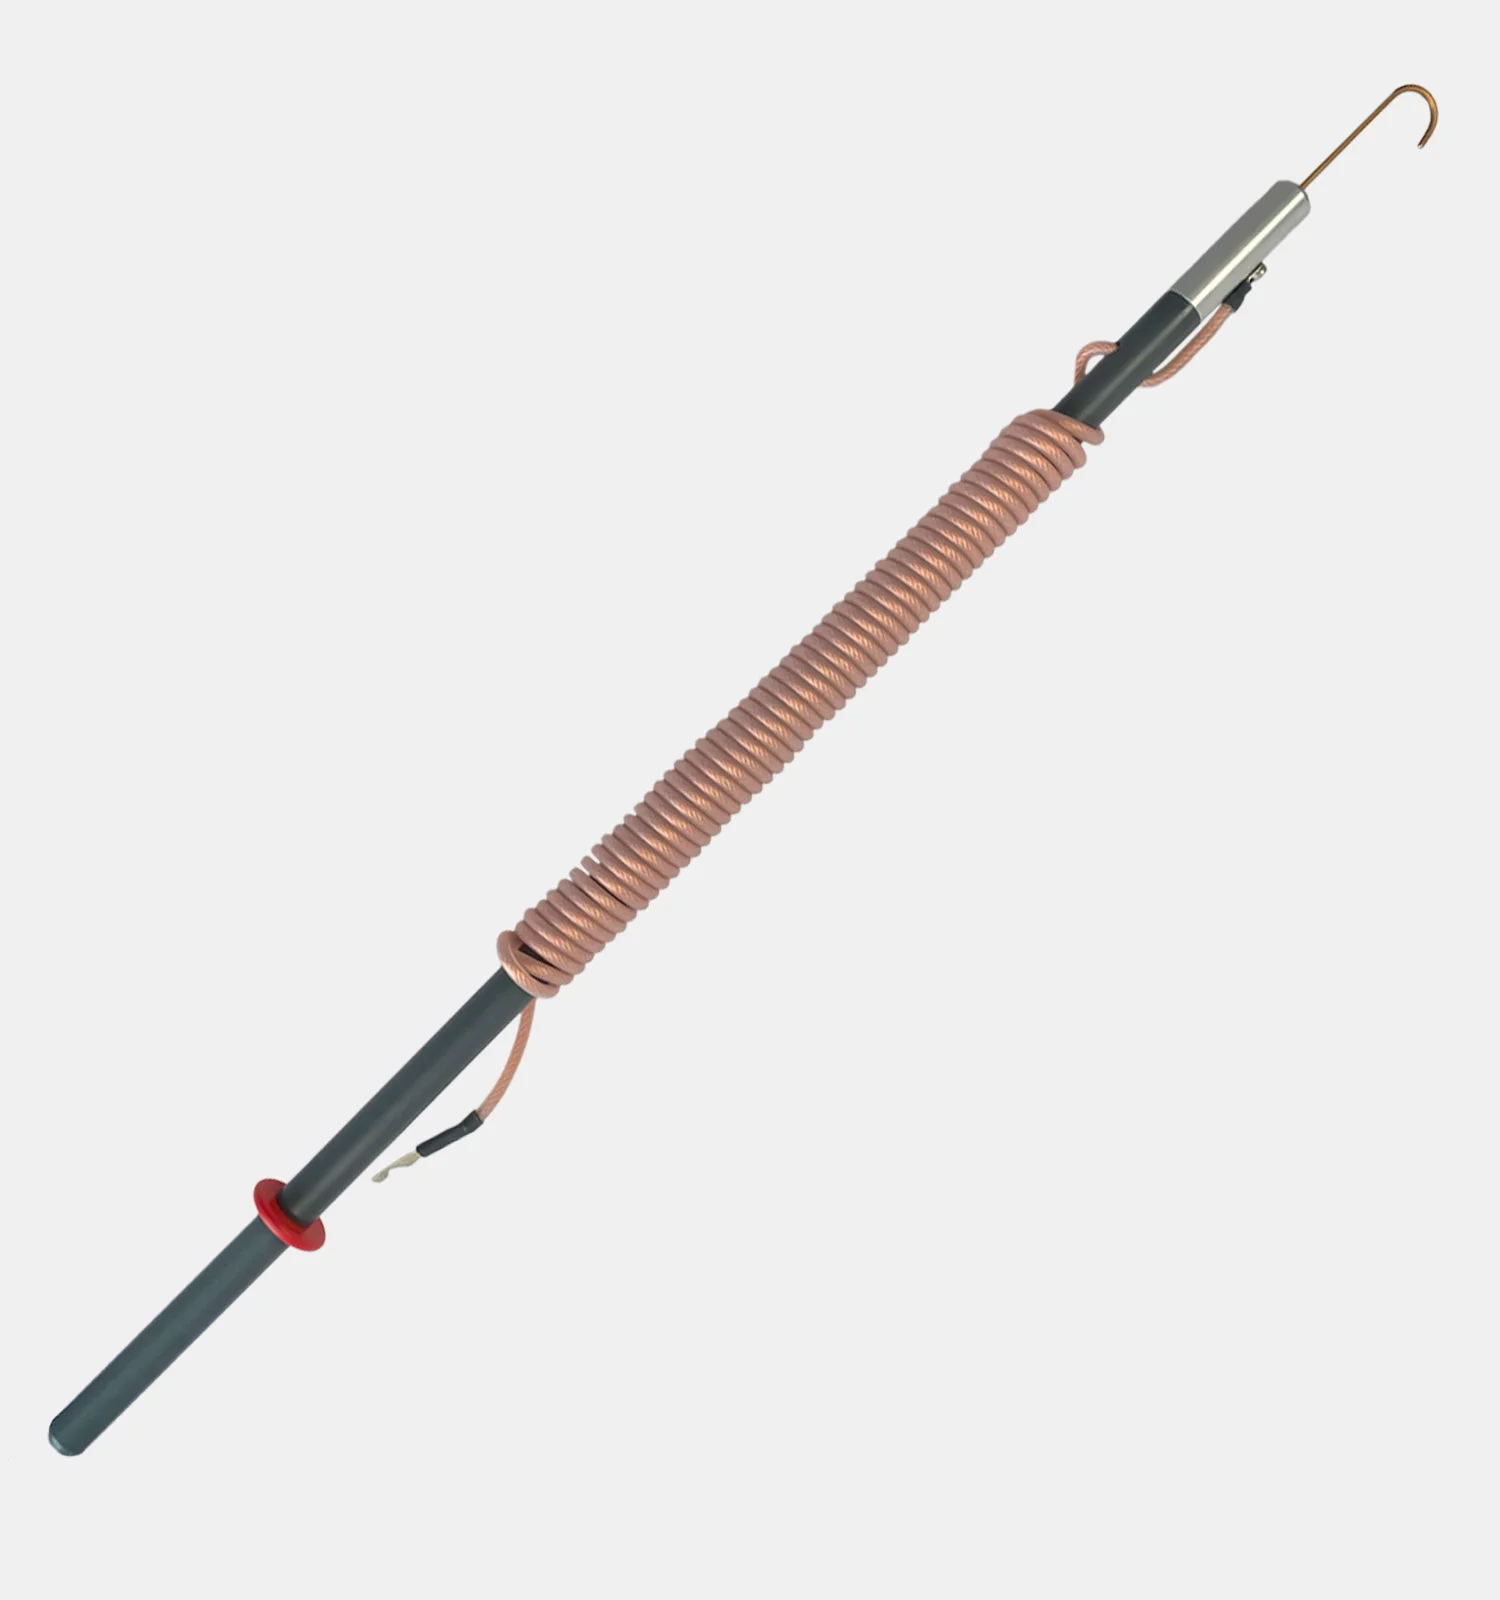 Suppliers of ES50 Earthing Stick